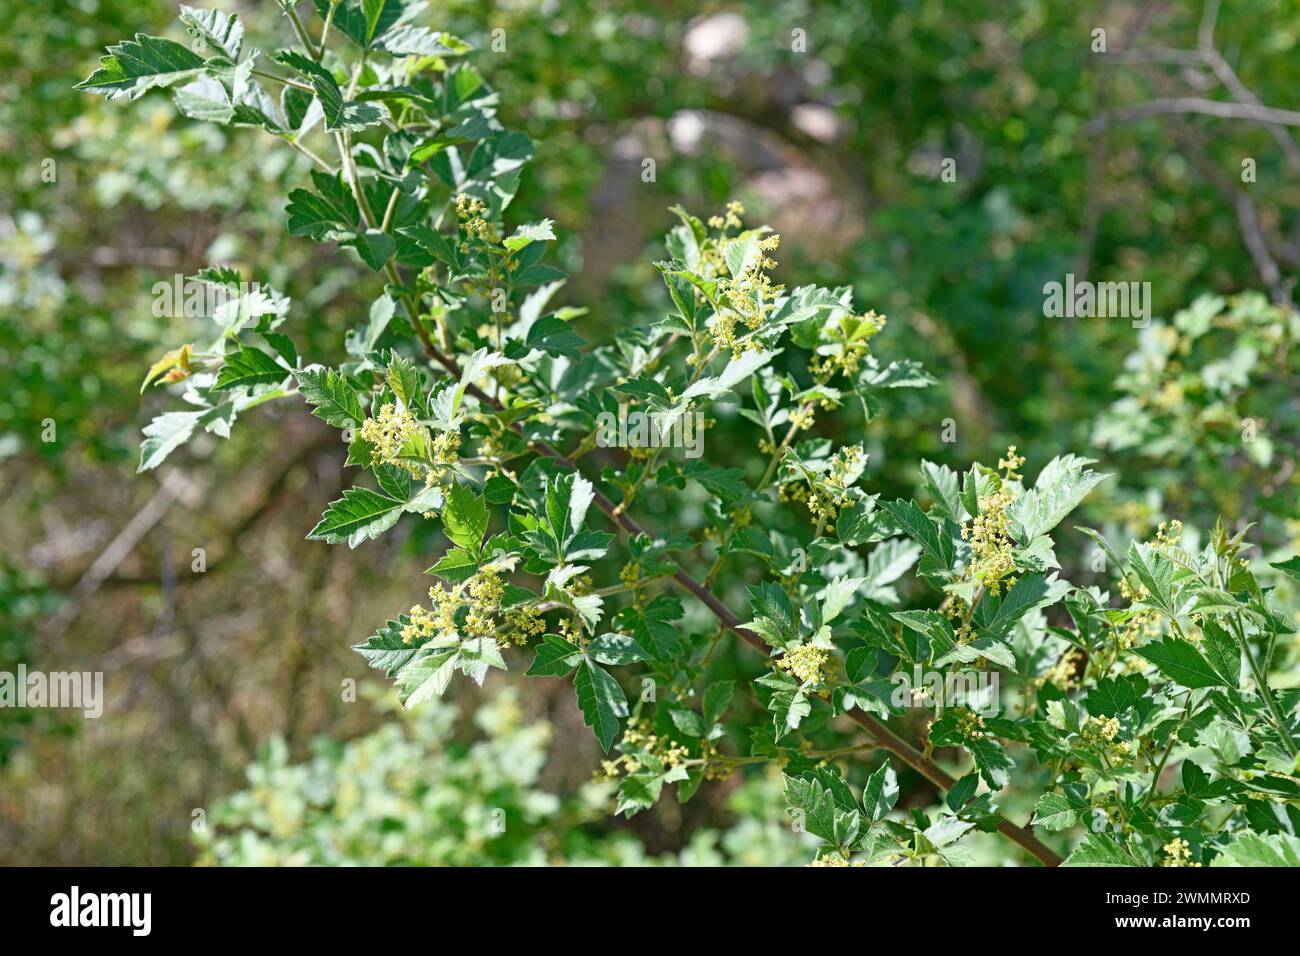 Nana berry (Rhus dentata is a deciduous tree native to South Africa. Flowers and leaves detail. Stock Photo